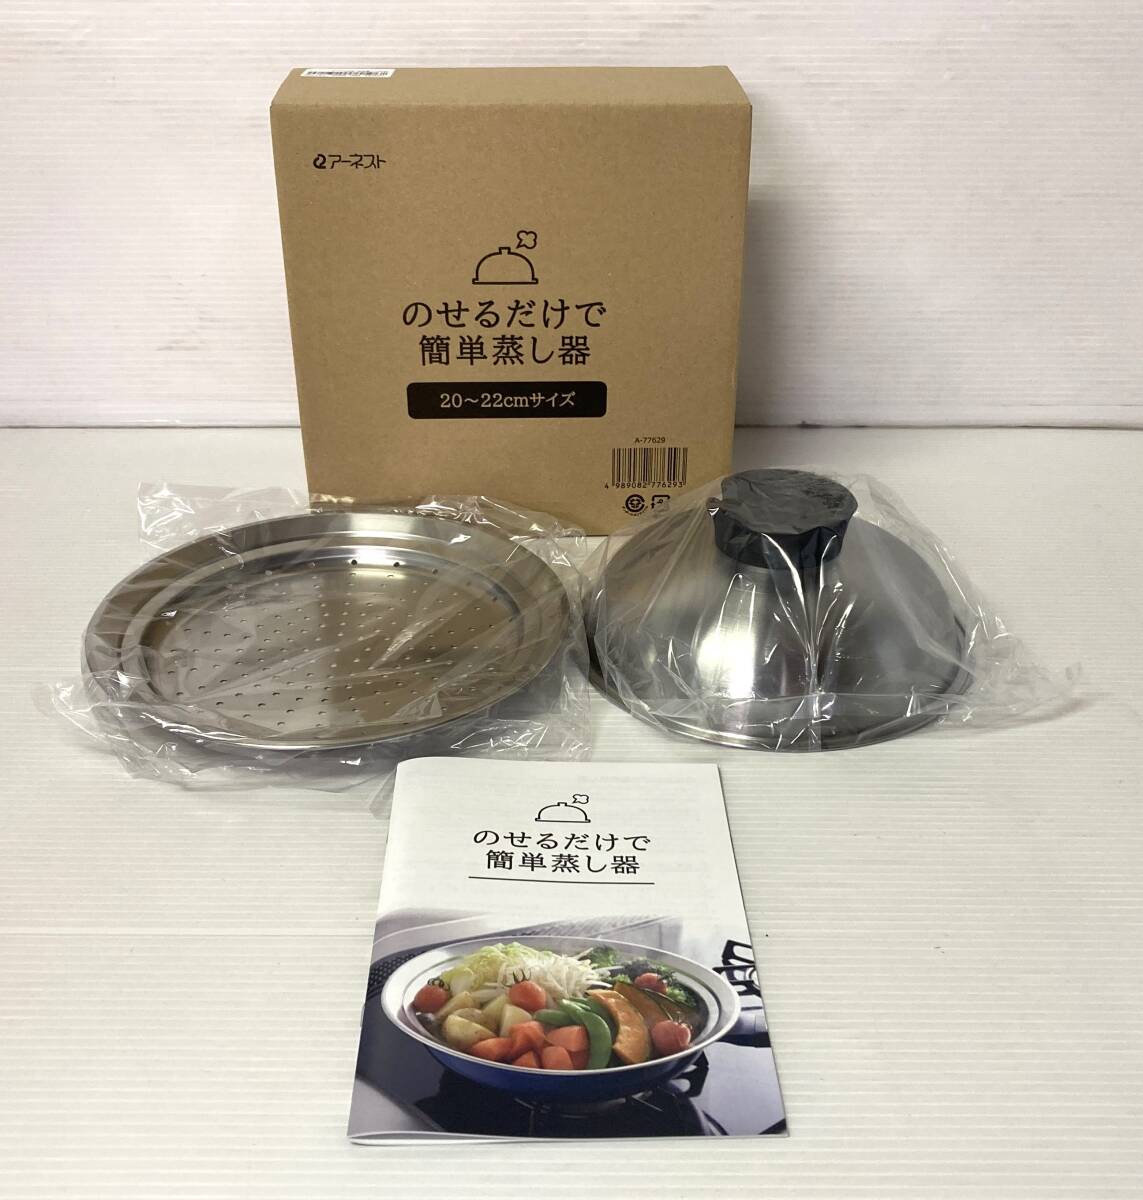 ** unused Earnest. .. only . easy steamer 20-22cm size kitchen articles cookware box manual booklet **